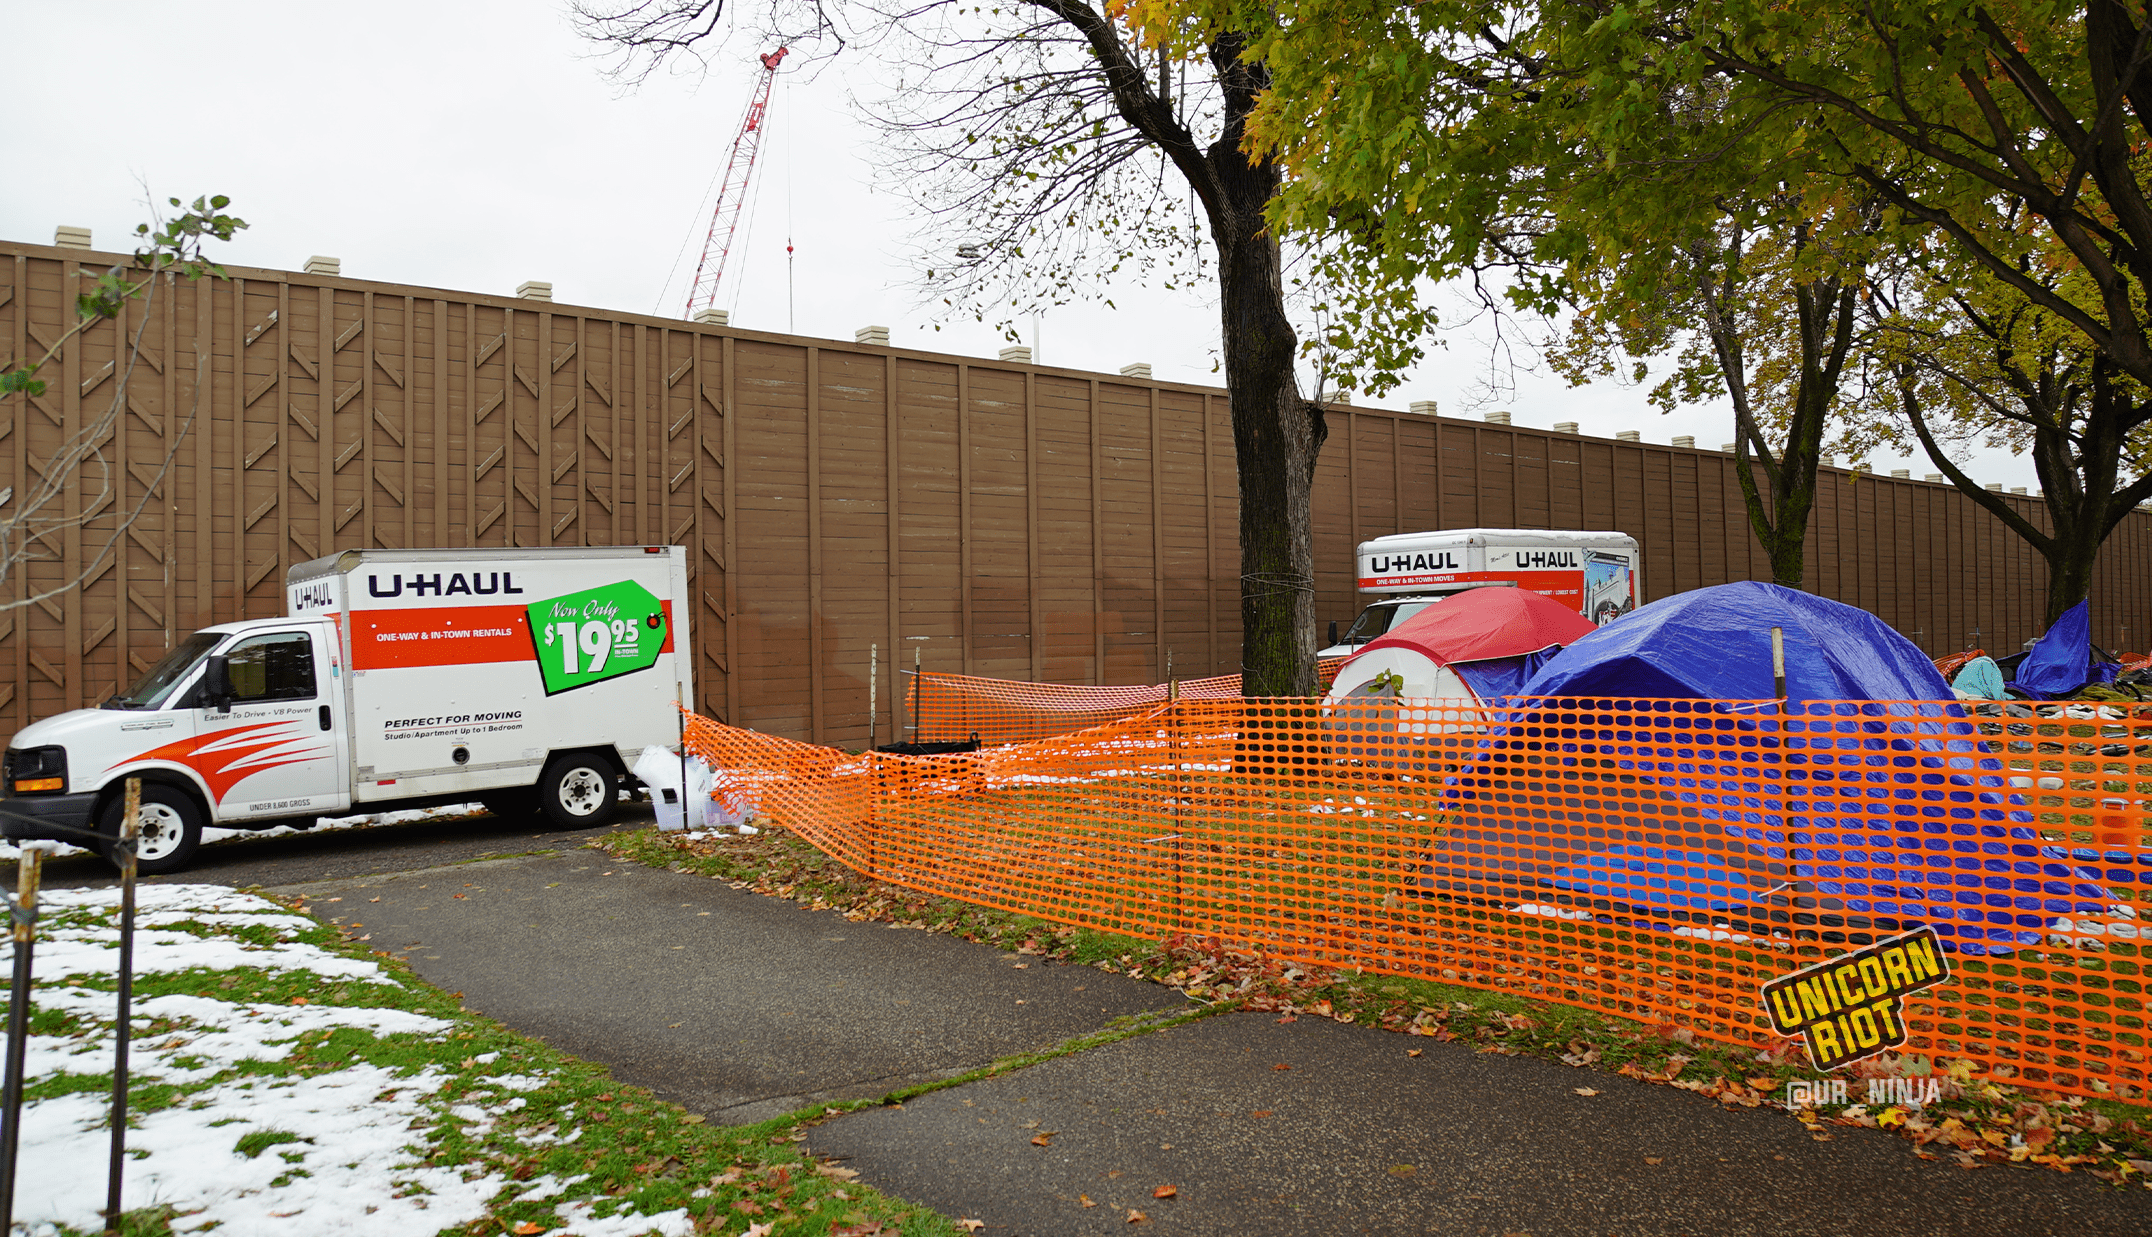 image: the perimeter of a sanctuary tent camp area is surrounded by orange plastic construction fencing; the fence cuts diagonally across the image from bottom right, to the left of the image. On the sidewalk outside of the fencing, two U-Haul trucks are parked; residents' belongings are inside, being moved from MLK Park to another location. A gray tent with a blue tarp is propped up beneath and to the left behind the trunk of a maple tree. To the right of the tree is a waste bin that says City of Minneapolis on its side. Partially-melted snow is visible on the ground.